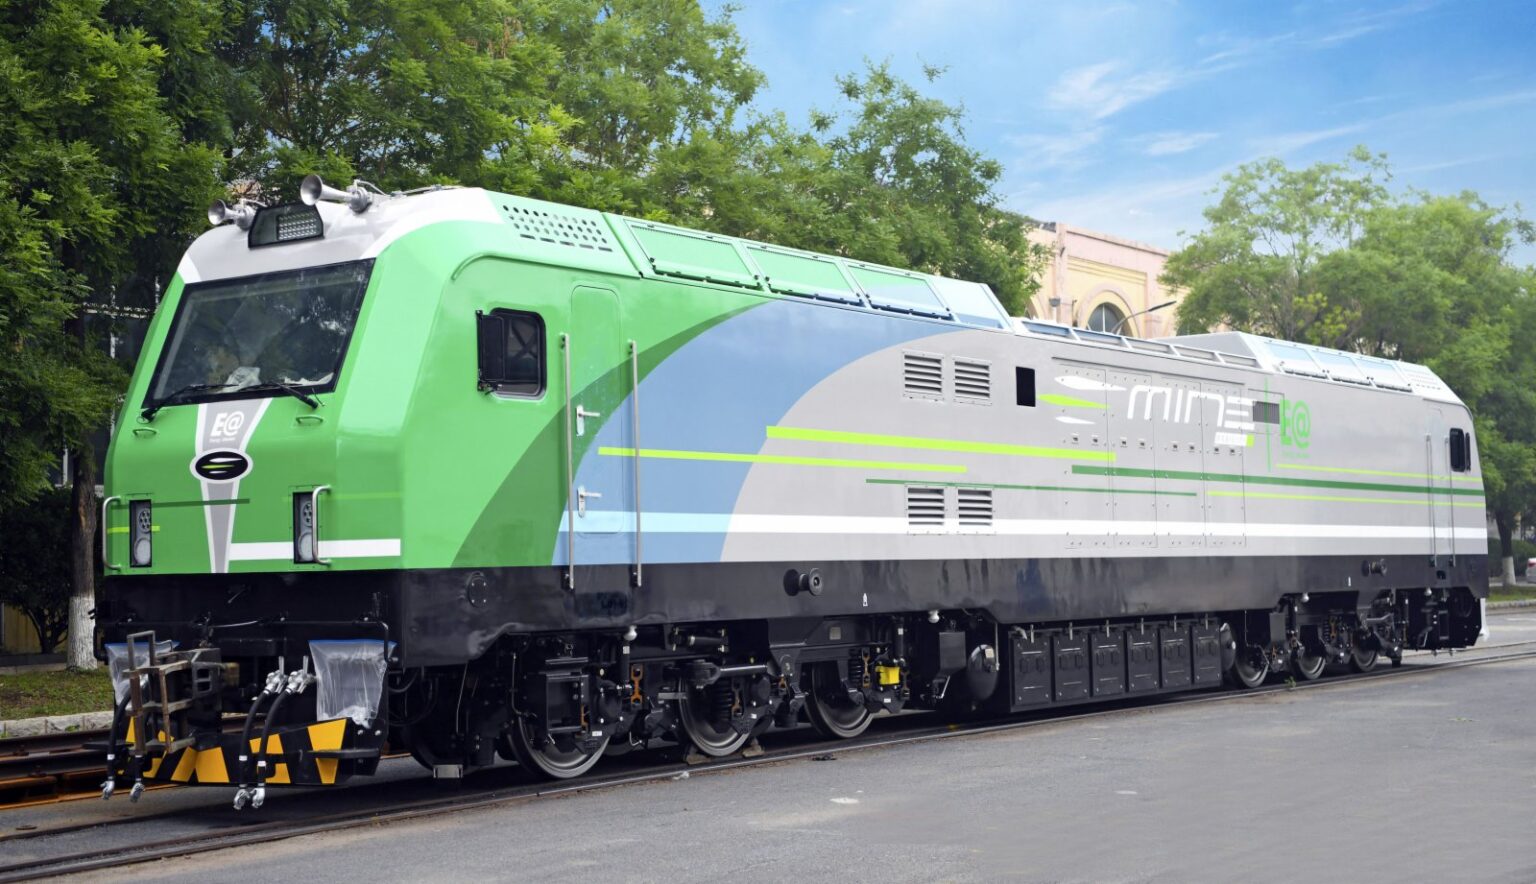 The battery-powered locomotive by CRRС manufactured for Thailand